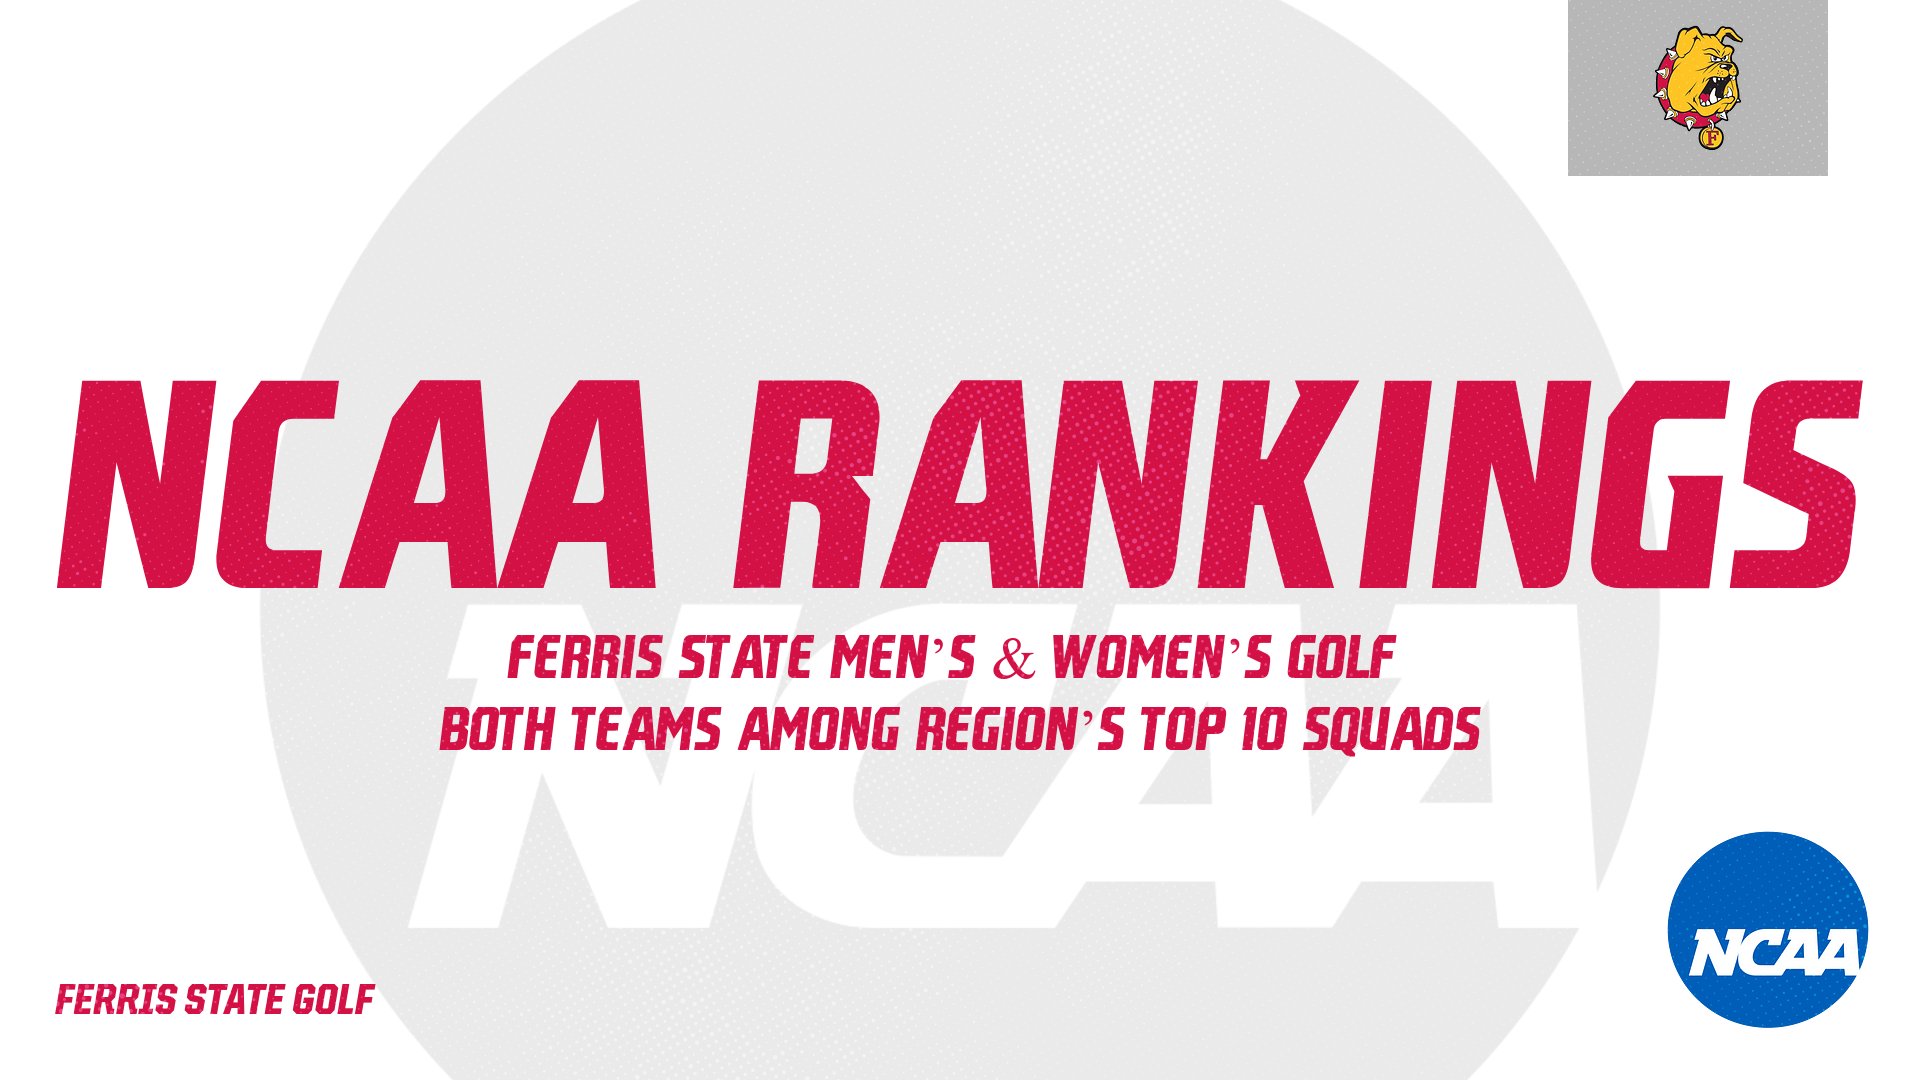 Ferris State Golf Teams Ranked Among Region's Top 10 Squads